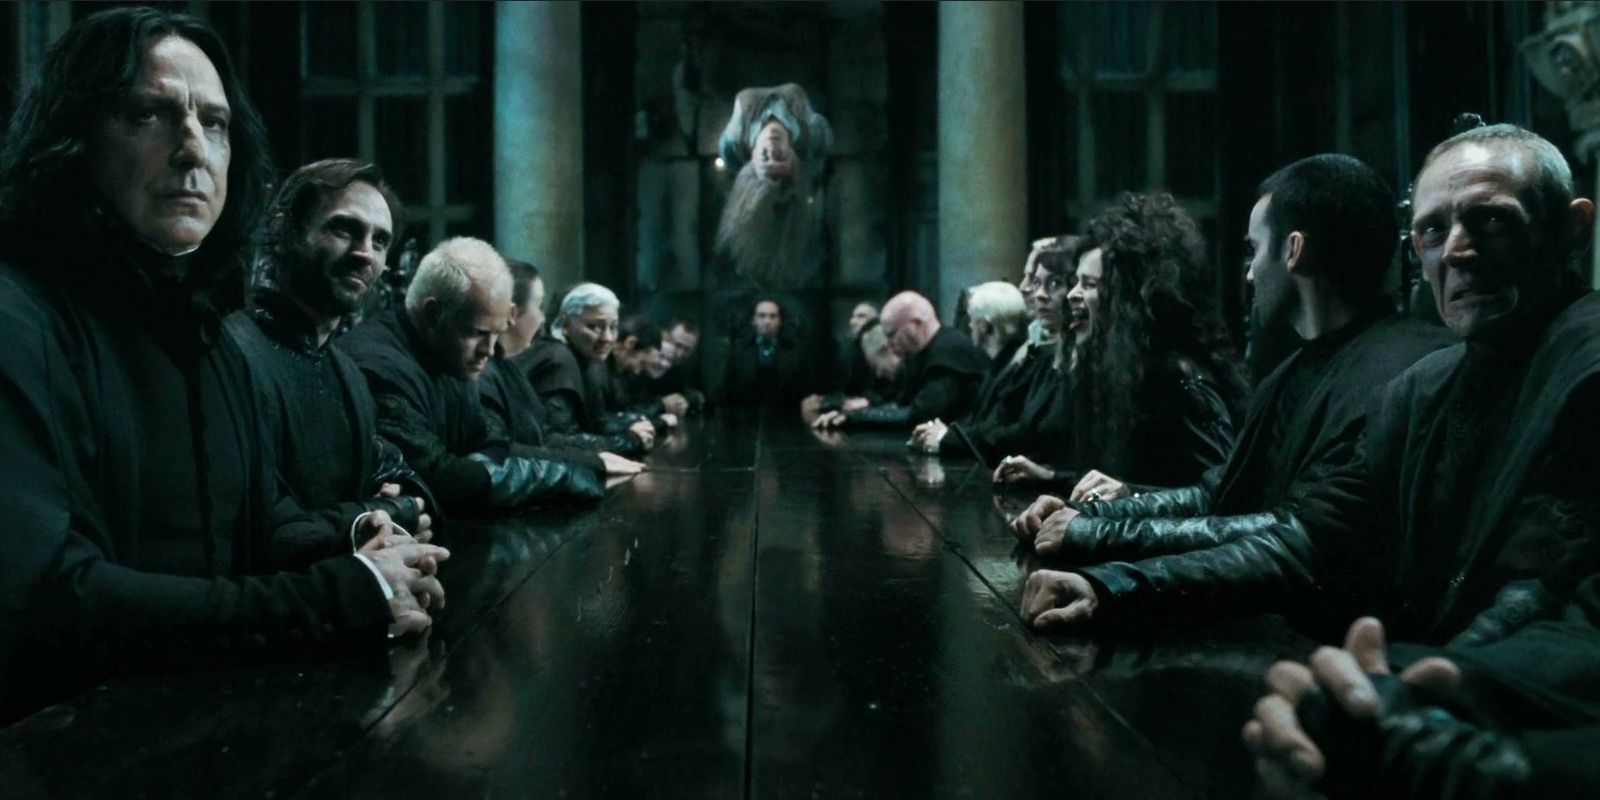 A group of Death Eaters in Harry Potter